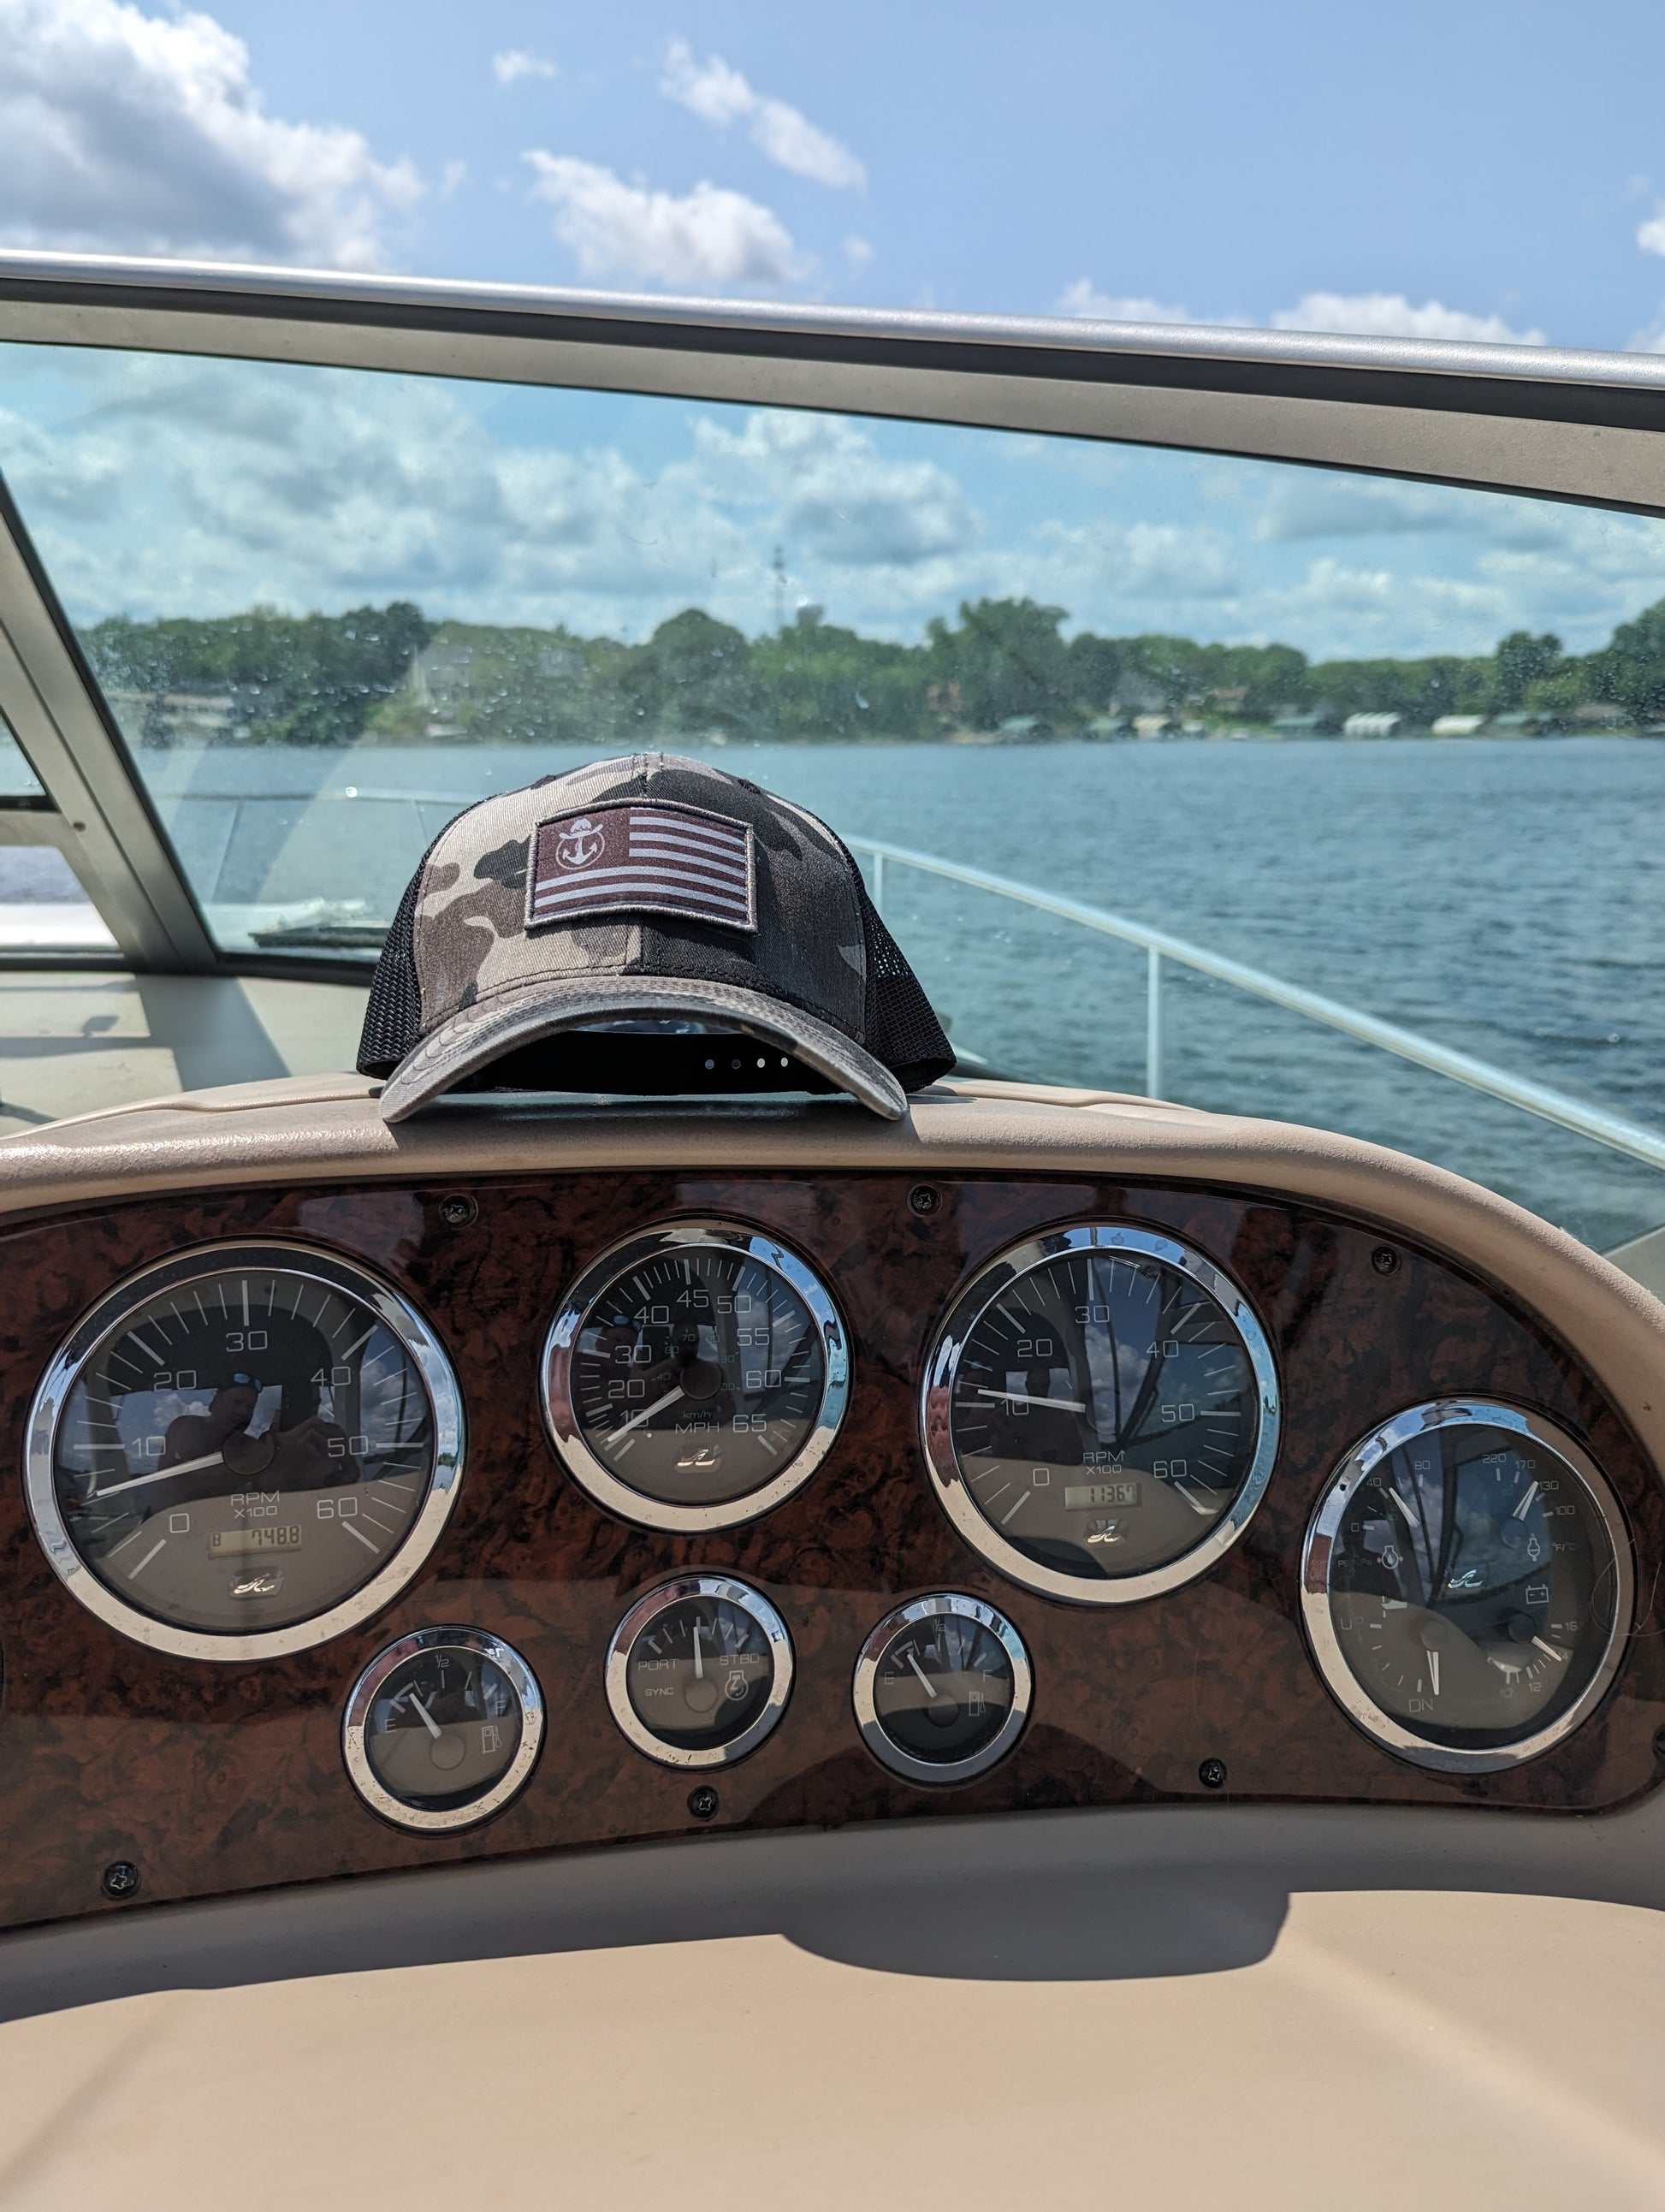 Photo of a Lake Cowboy Camo Baseball Hat (with Patriot Flag) shown on a boat console. Photo taken on Lake Minnetonka.